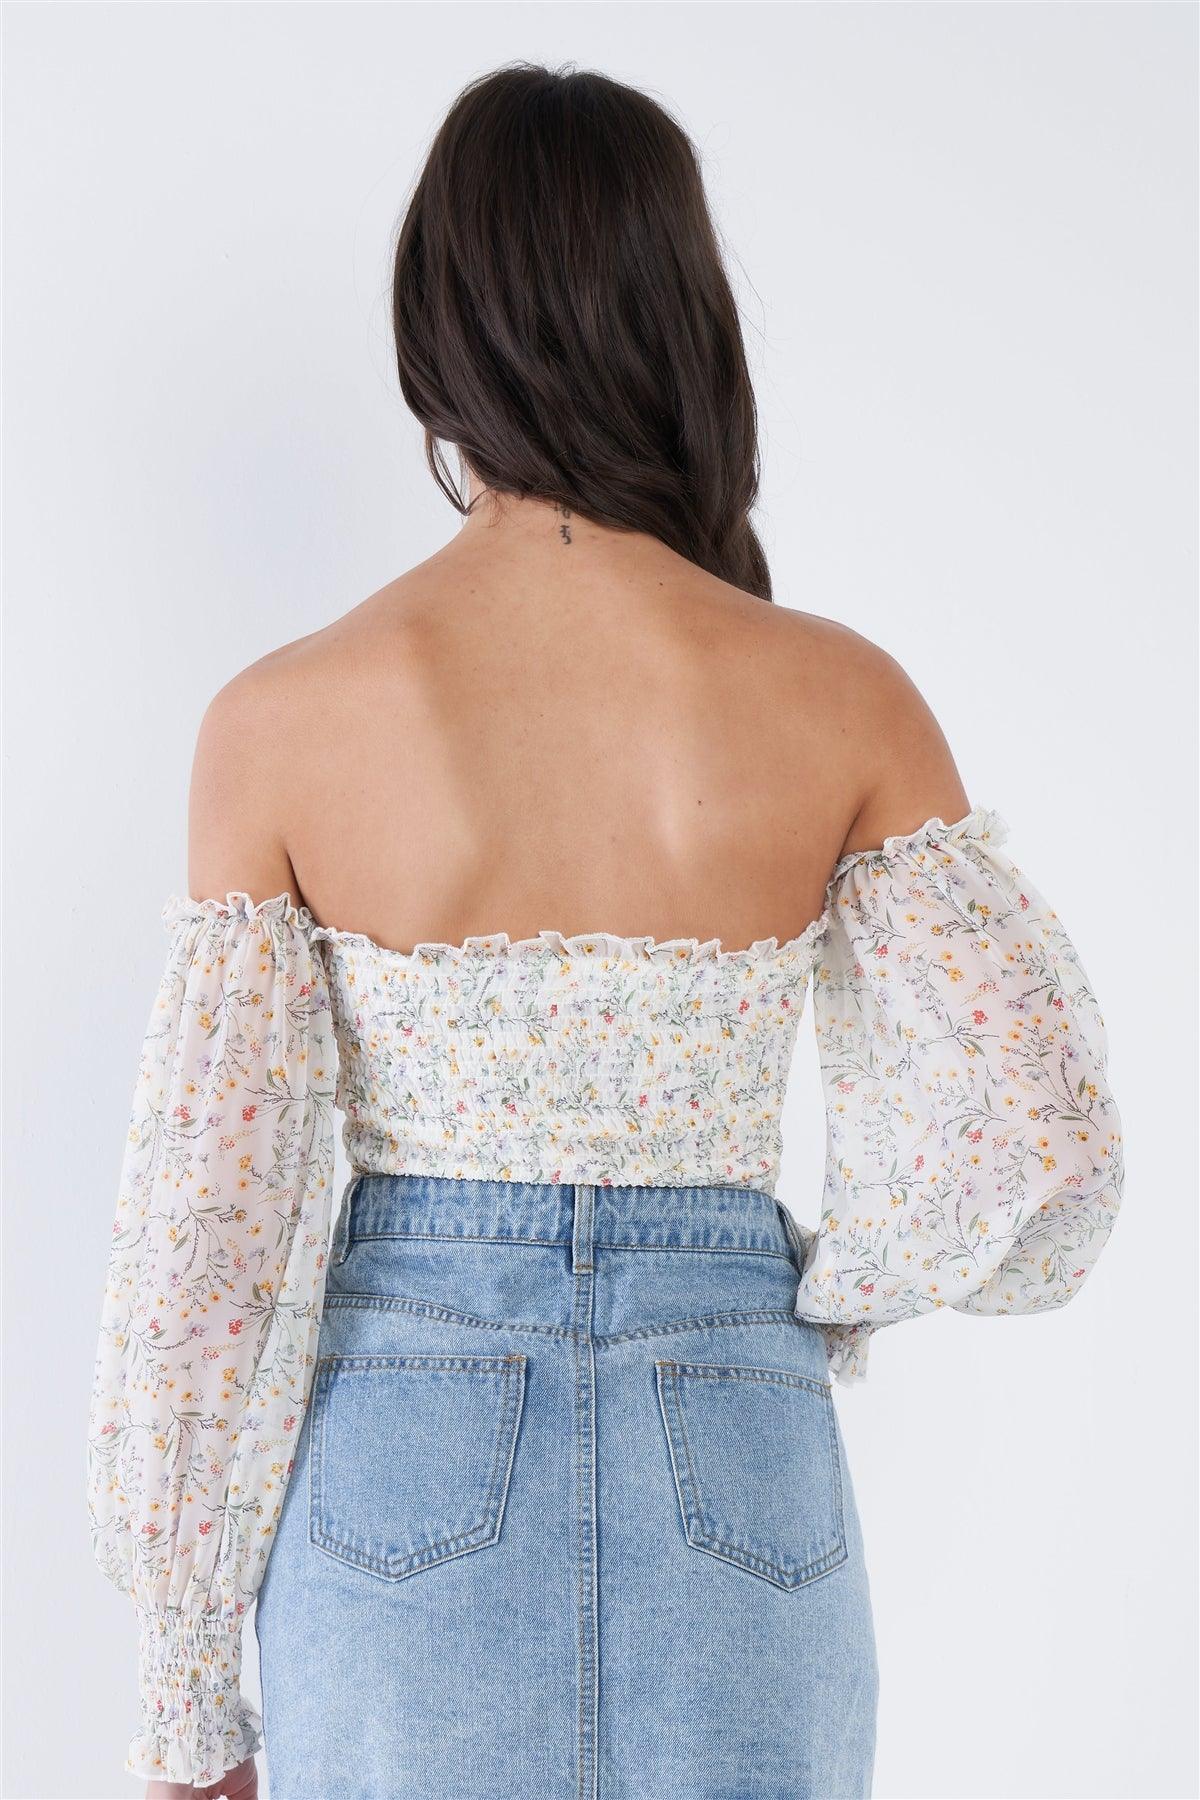 Off-White Sheer Floral Off-The-Shoulder Peplum Top /1-1-1